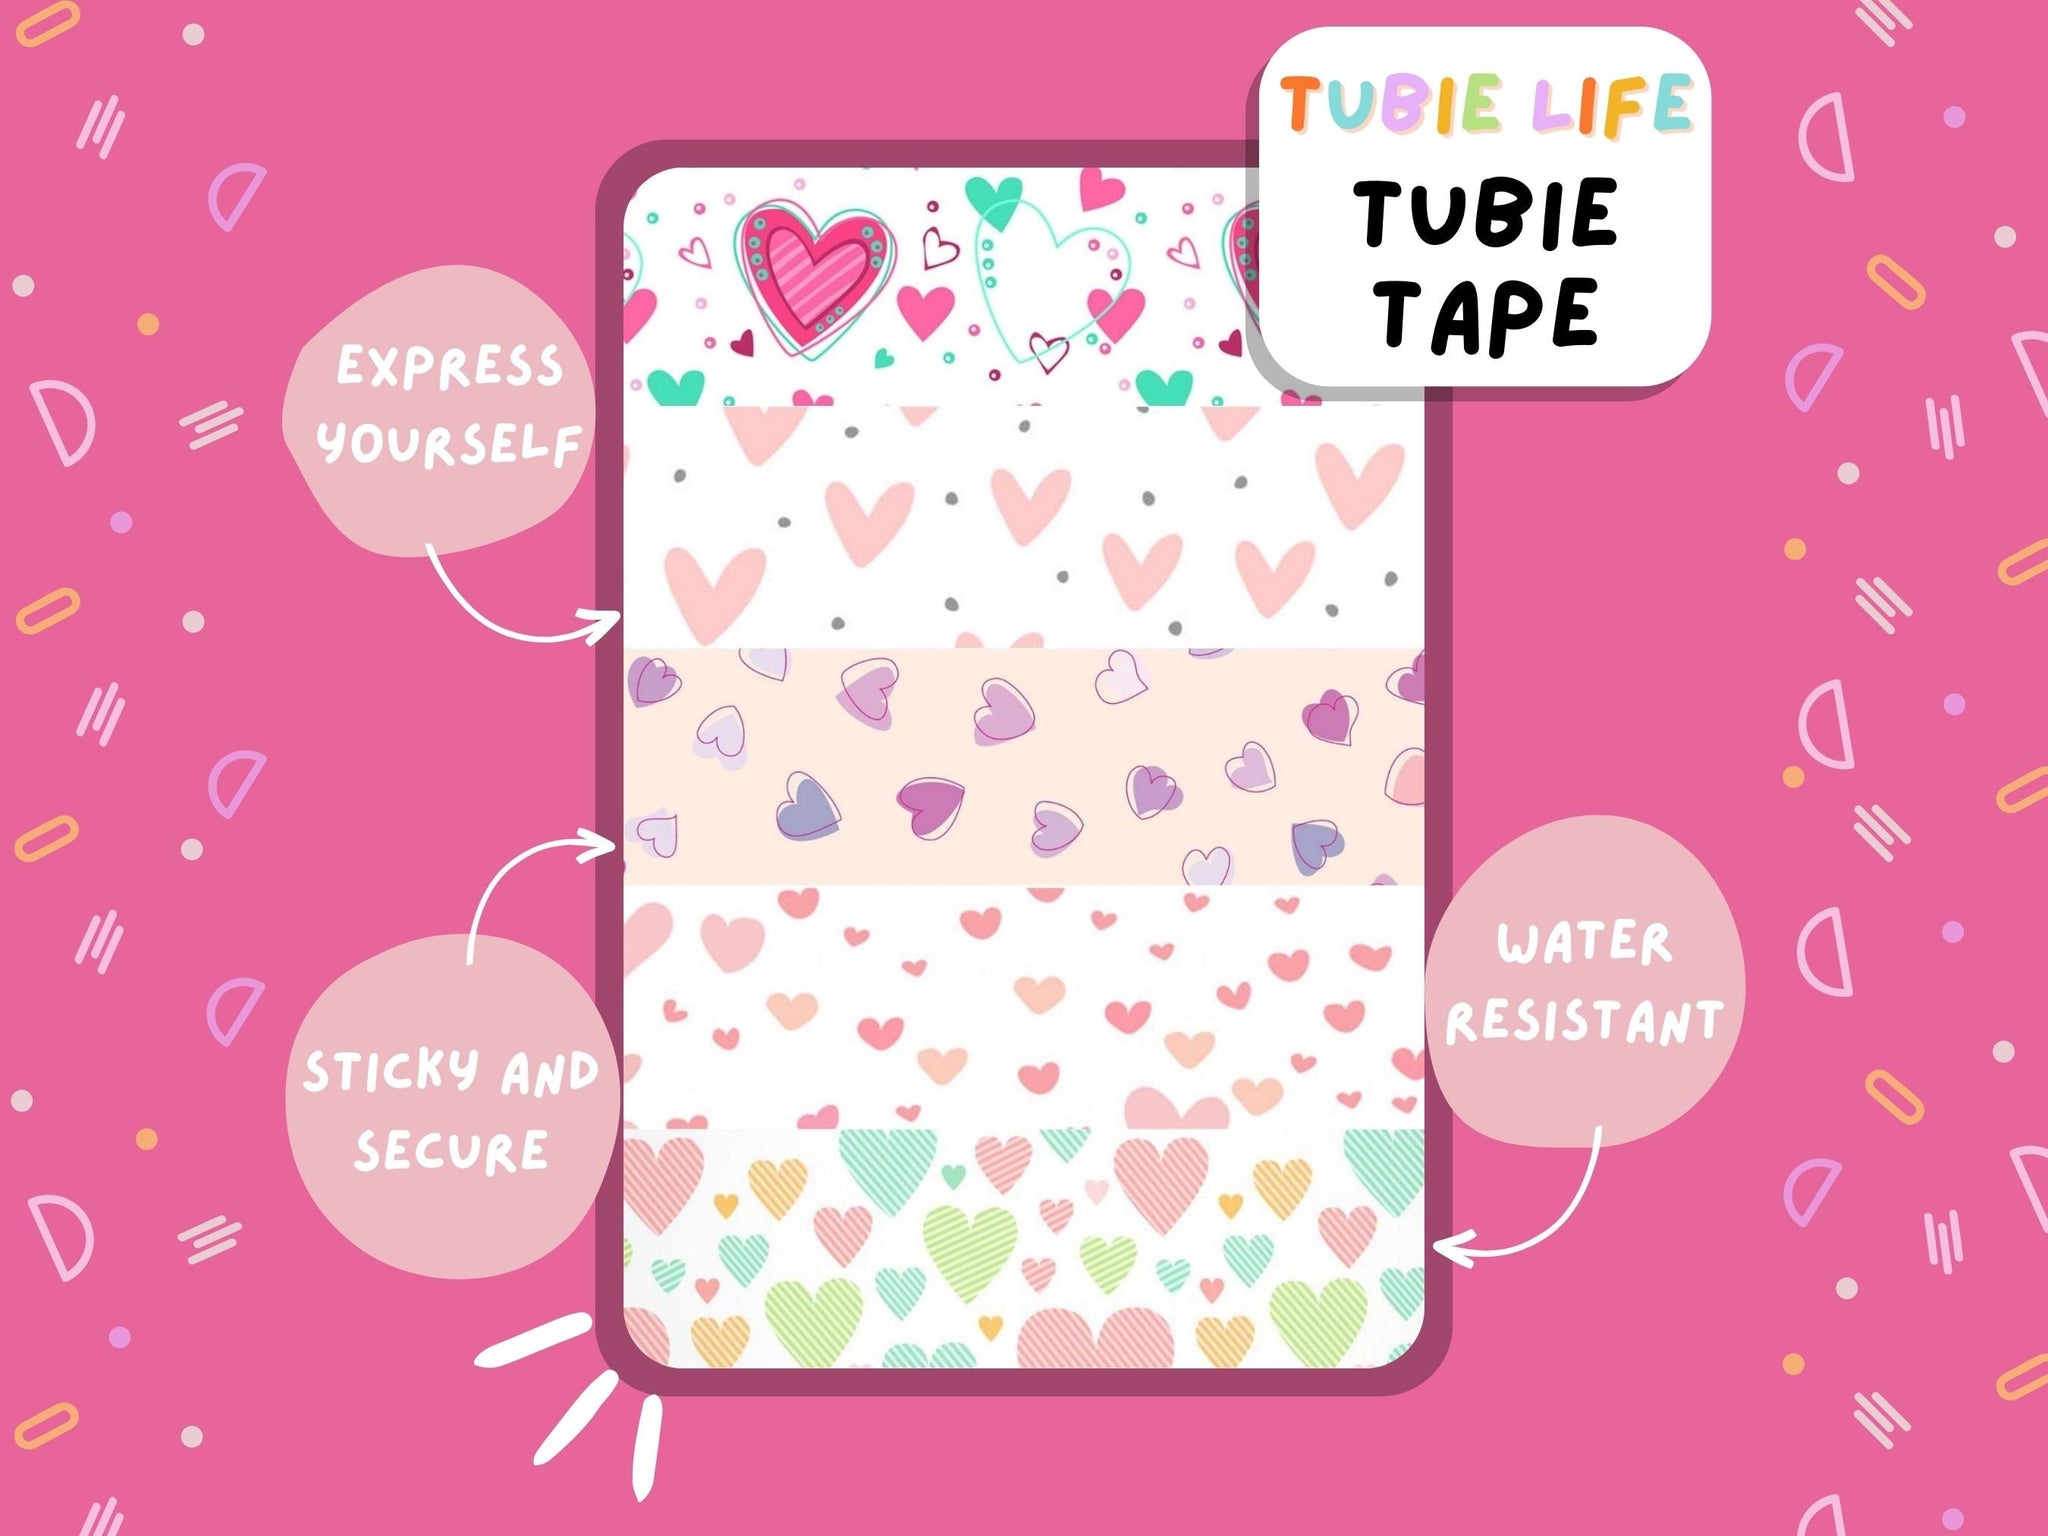 TUBIE TAPE Tubie Life cute hearts ng tube tape for feeding tubes and other tubing